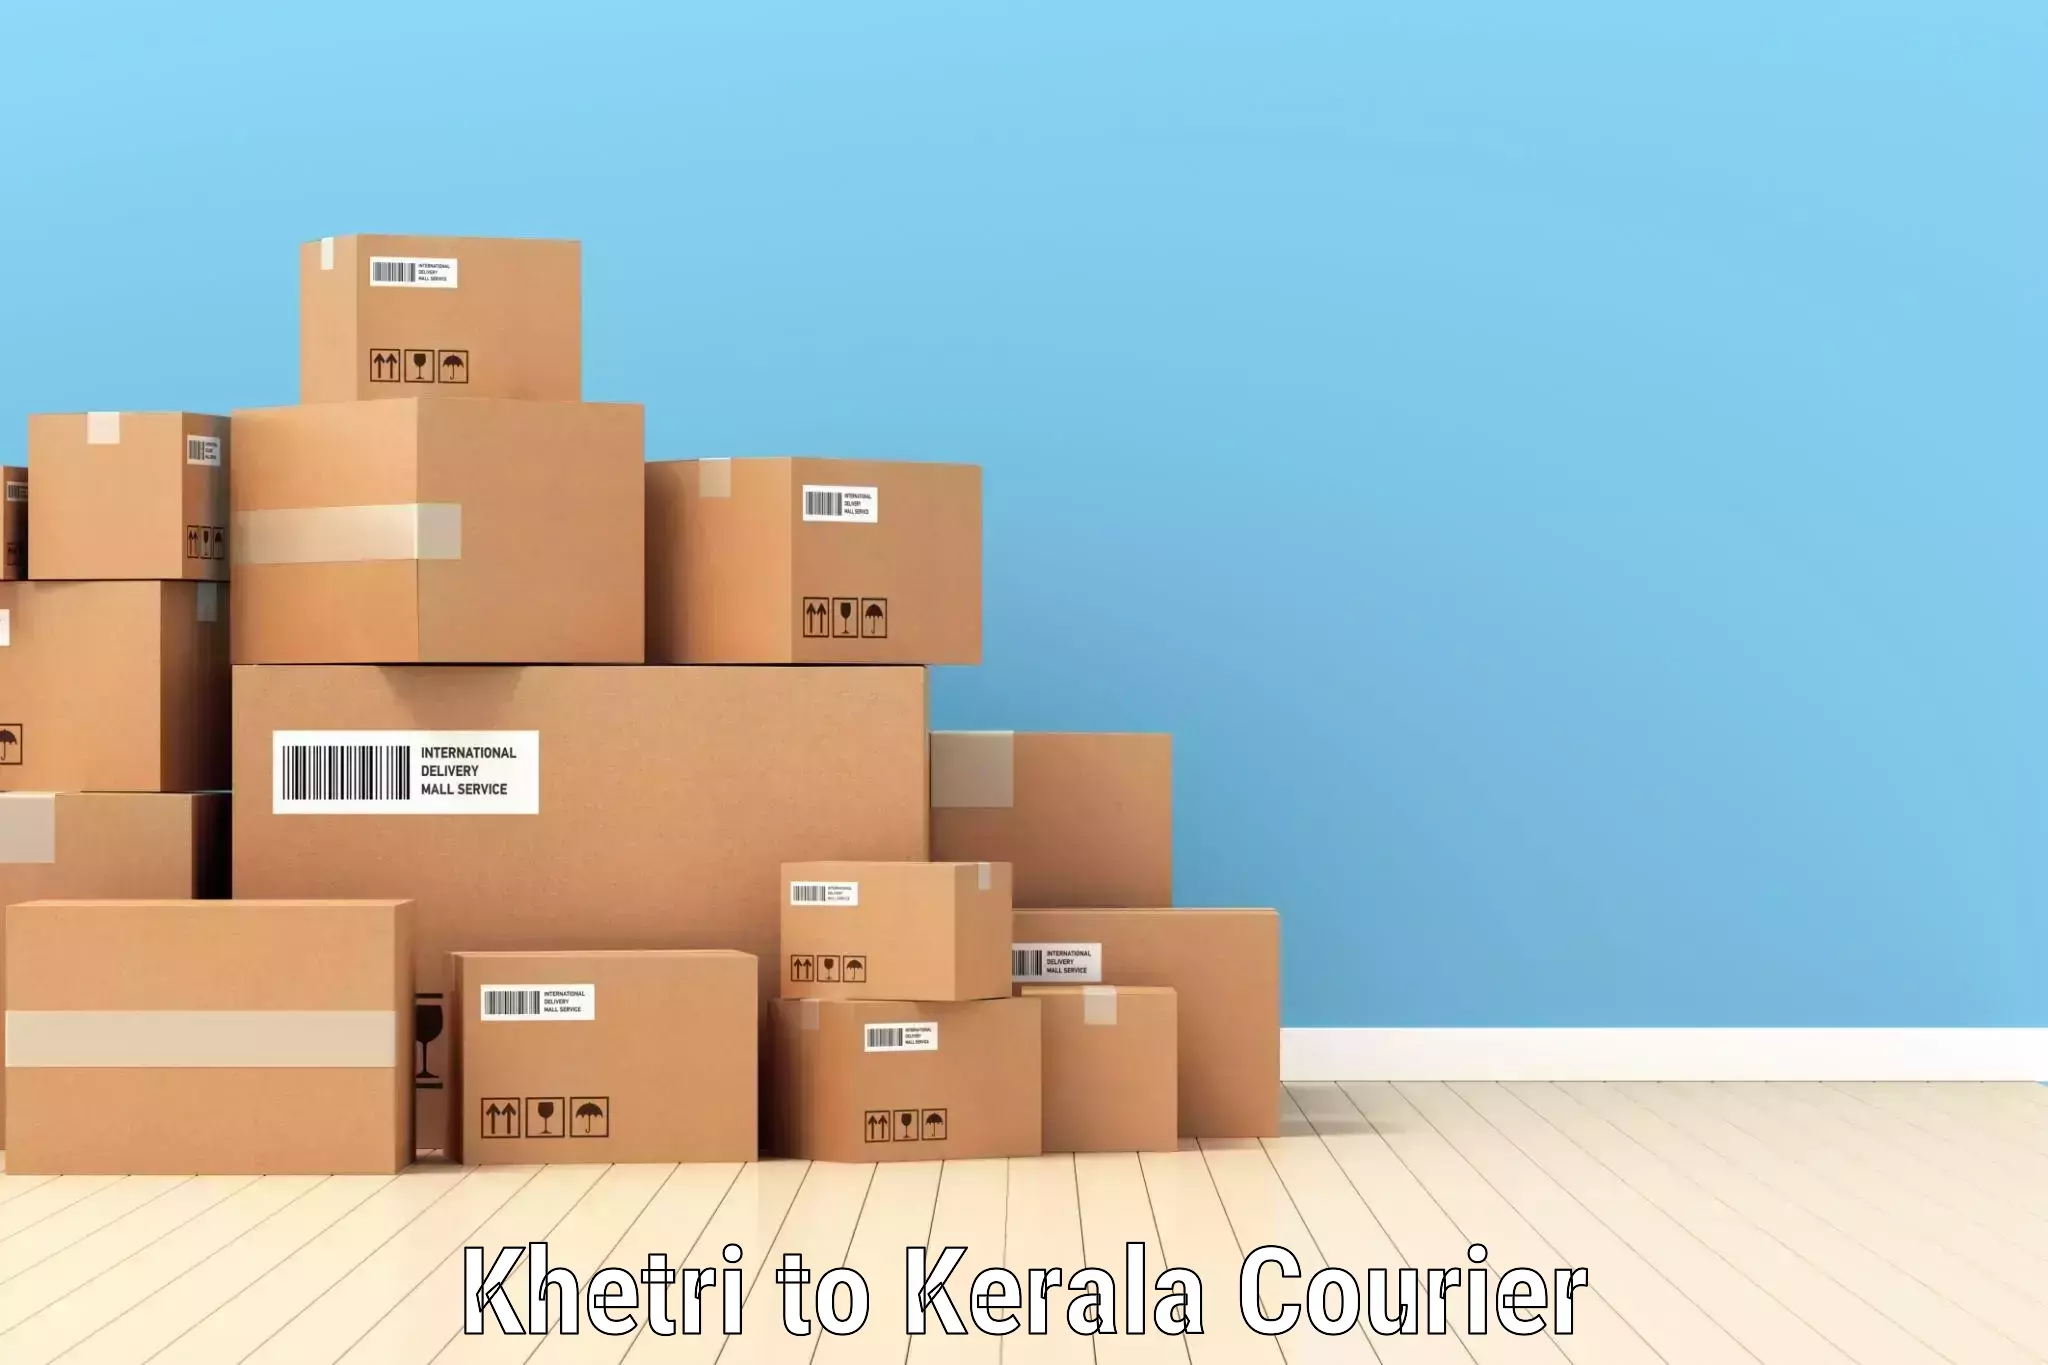 Local courier options Khetri to Kerala